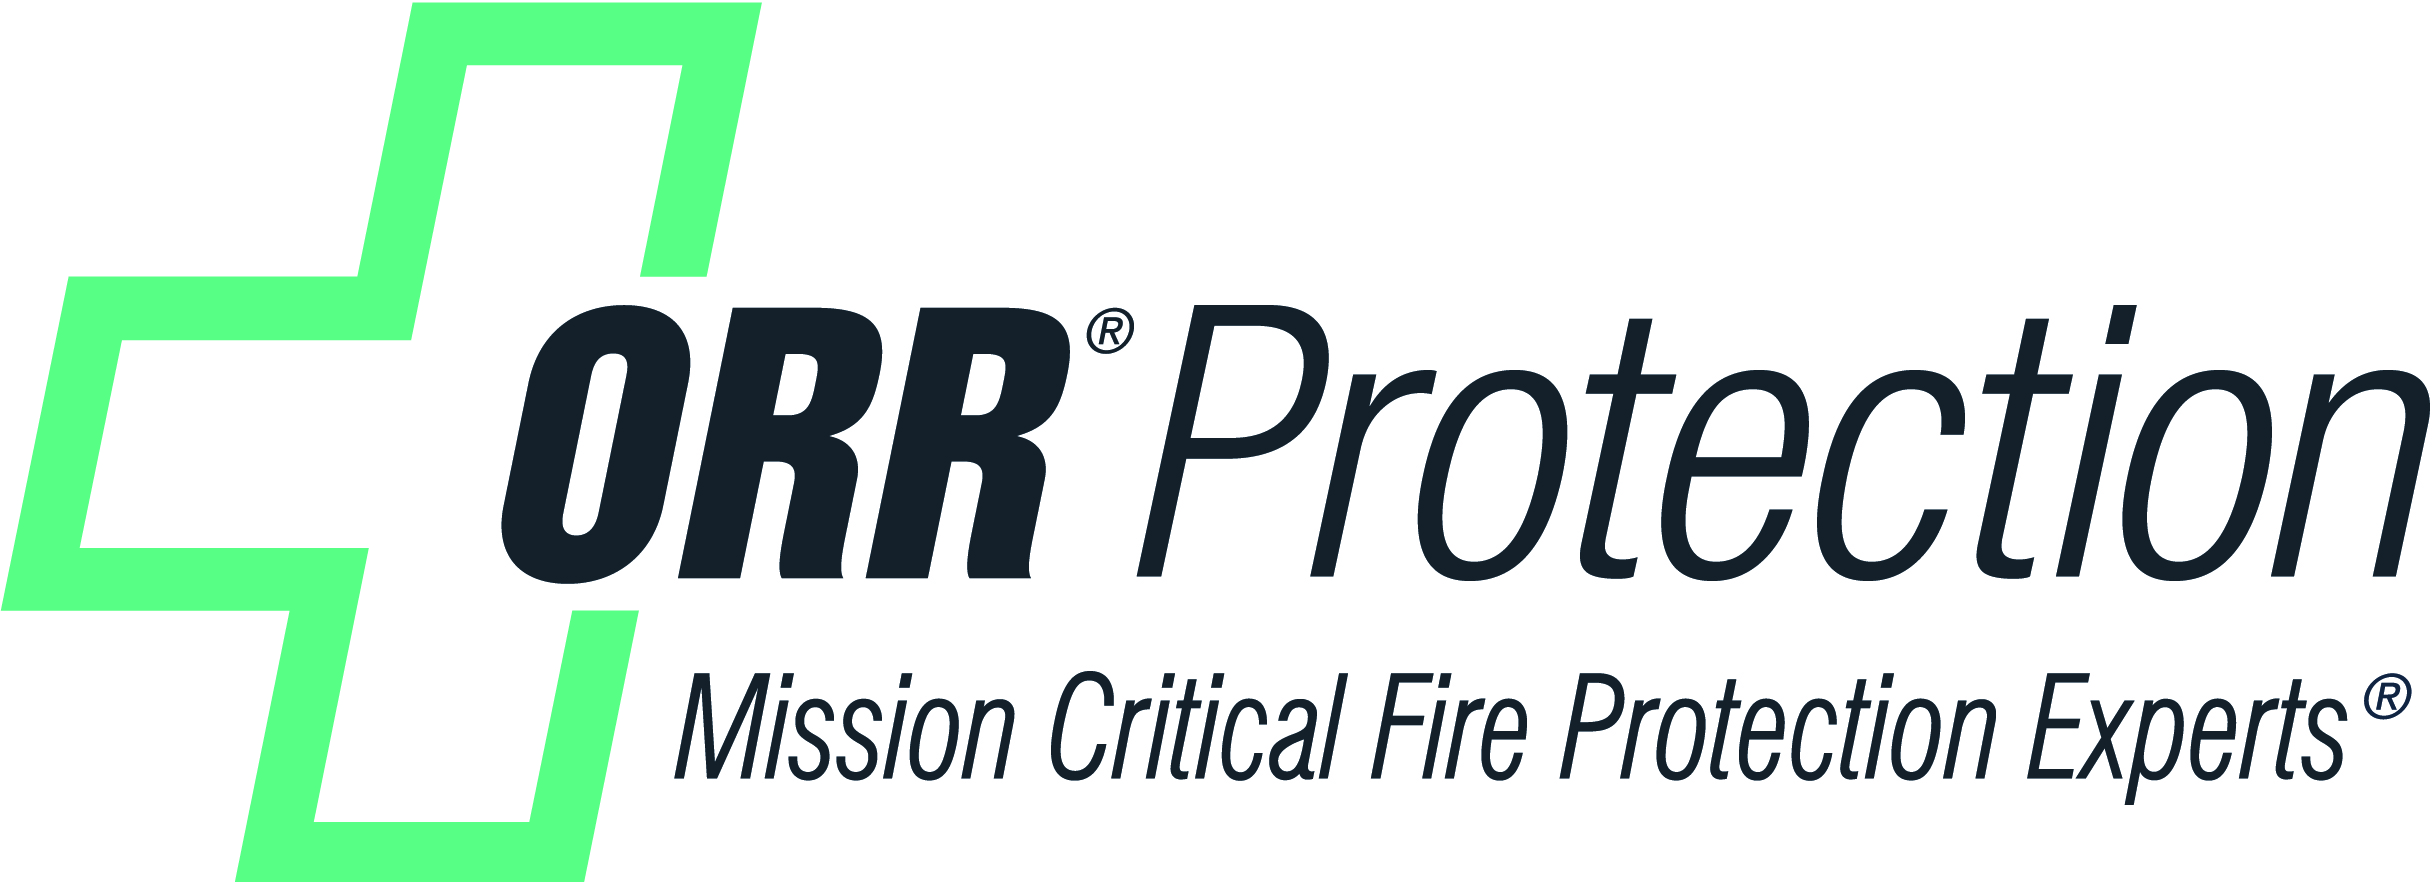 ORR Protection Services